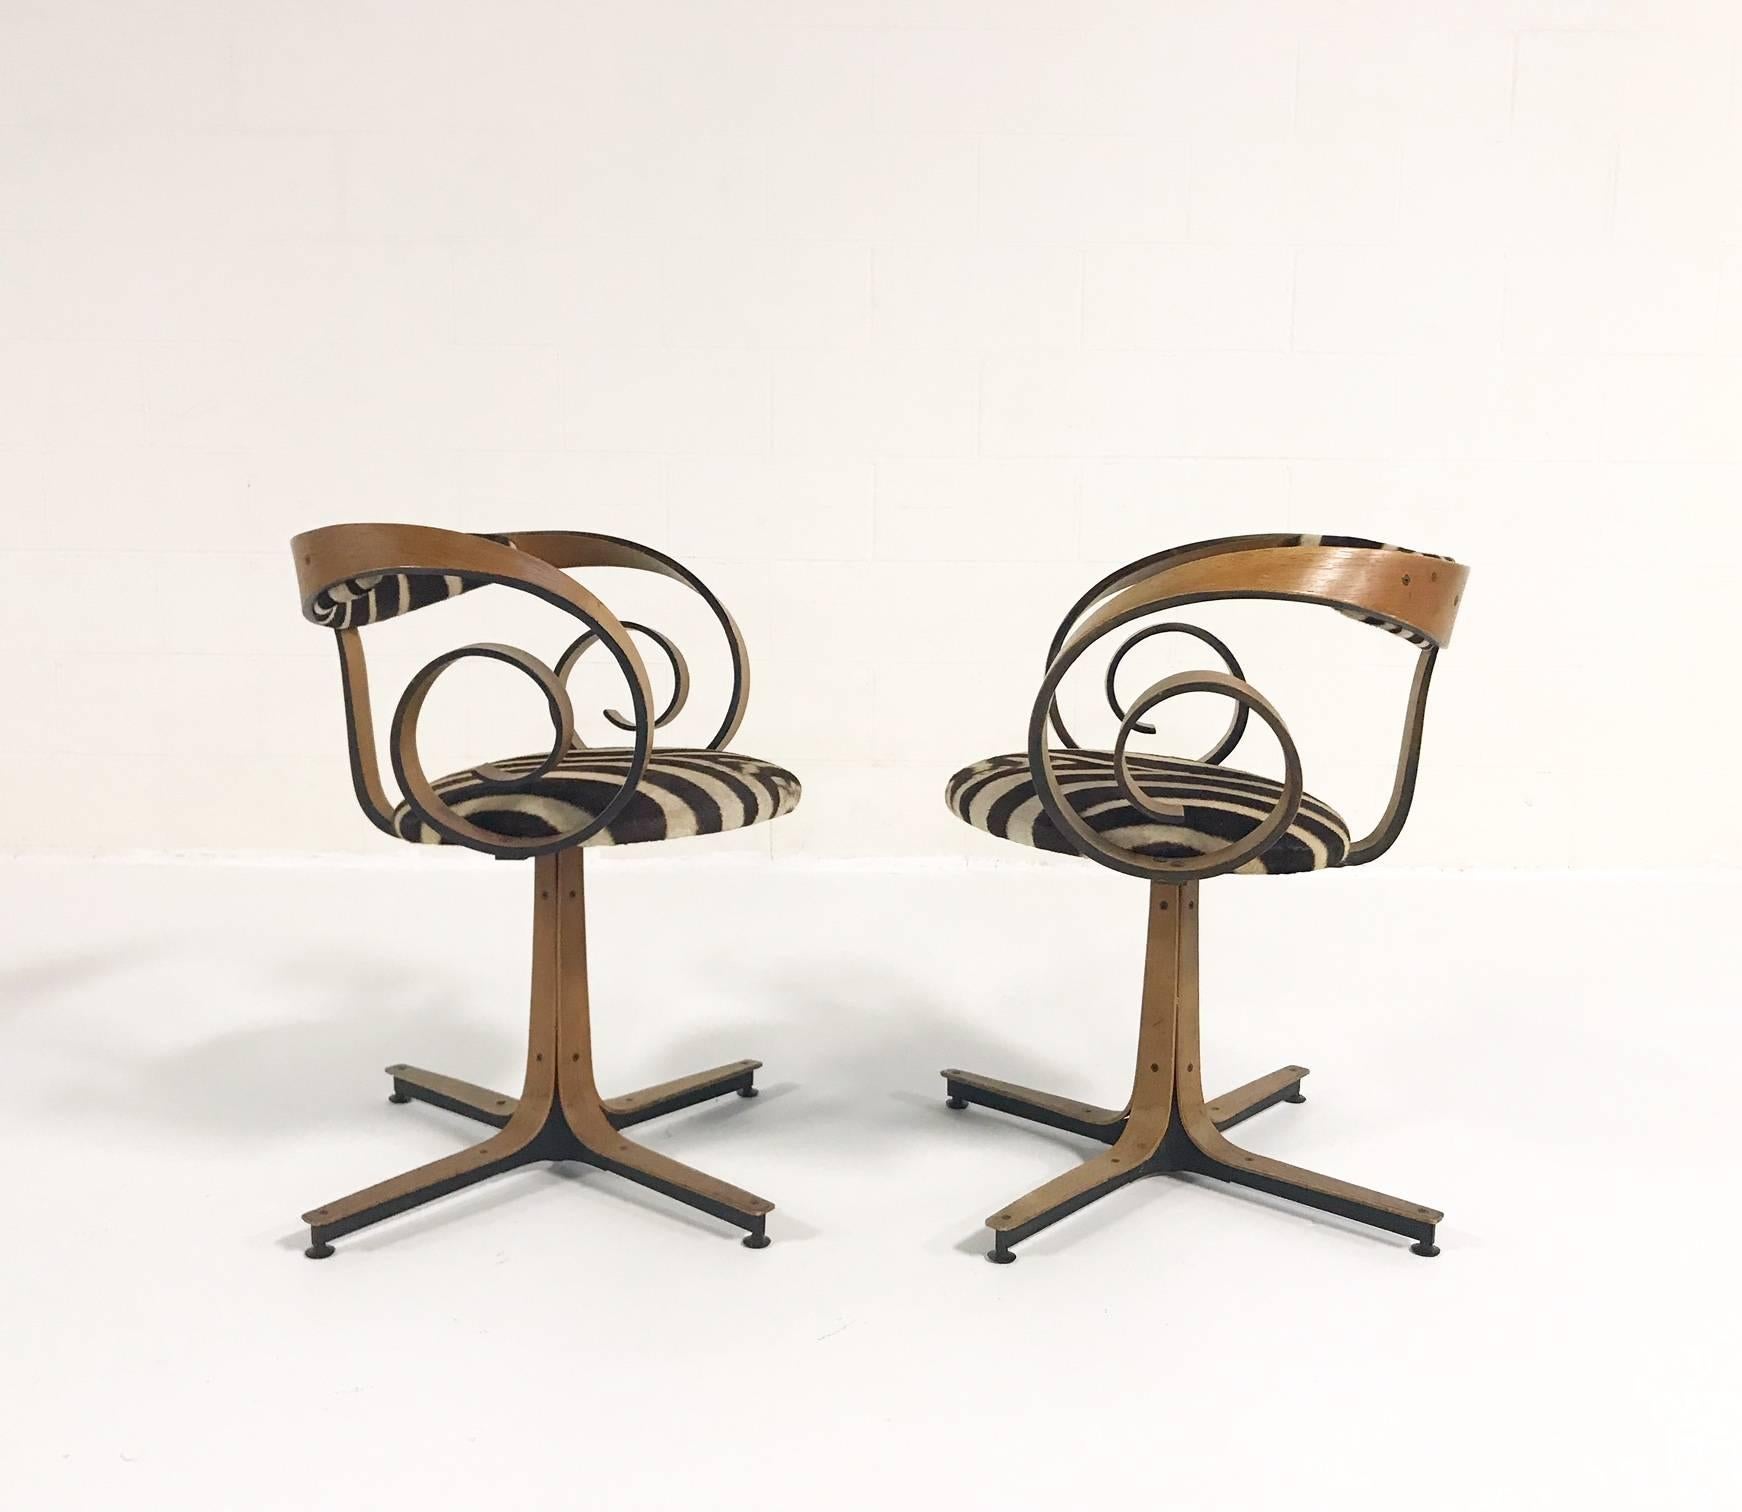 These Mulhauser chairs are a great example of why we do what we do, circa 1965. Collecting interesting, vintage pieces and elevating their status to something special by restoring and reupholstering in the ever-cool graphic beauty of zebra hide. We